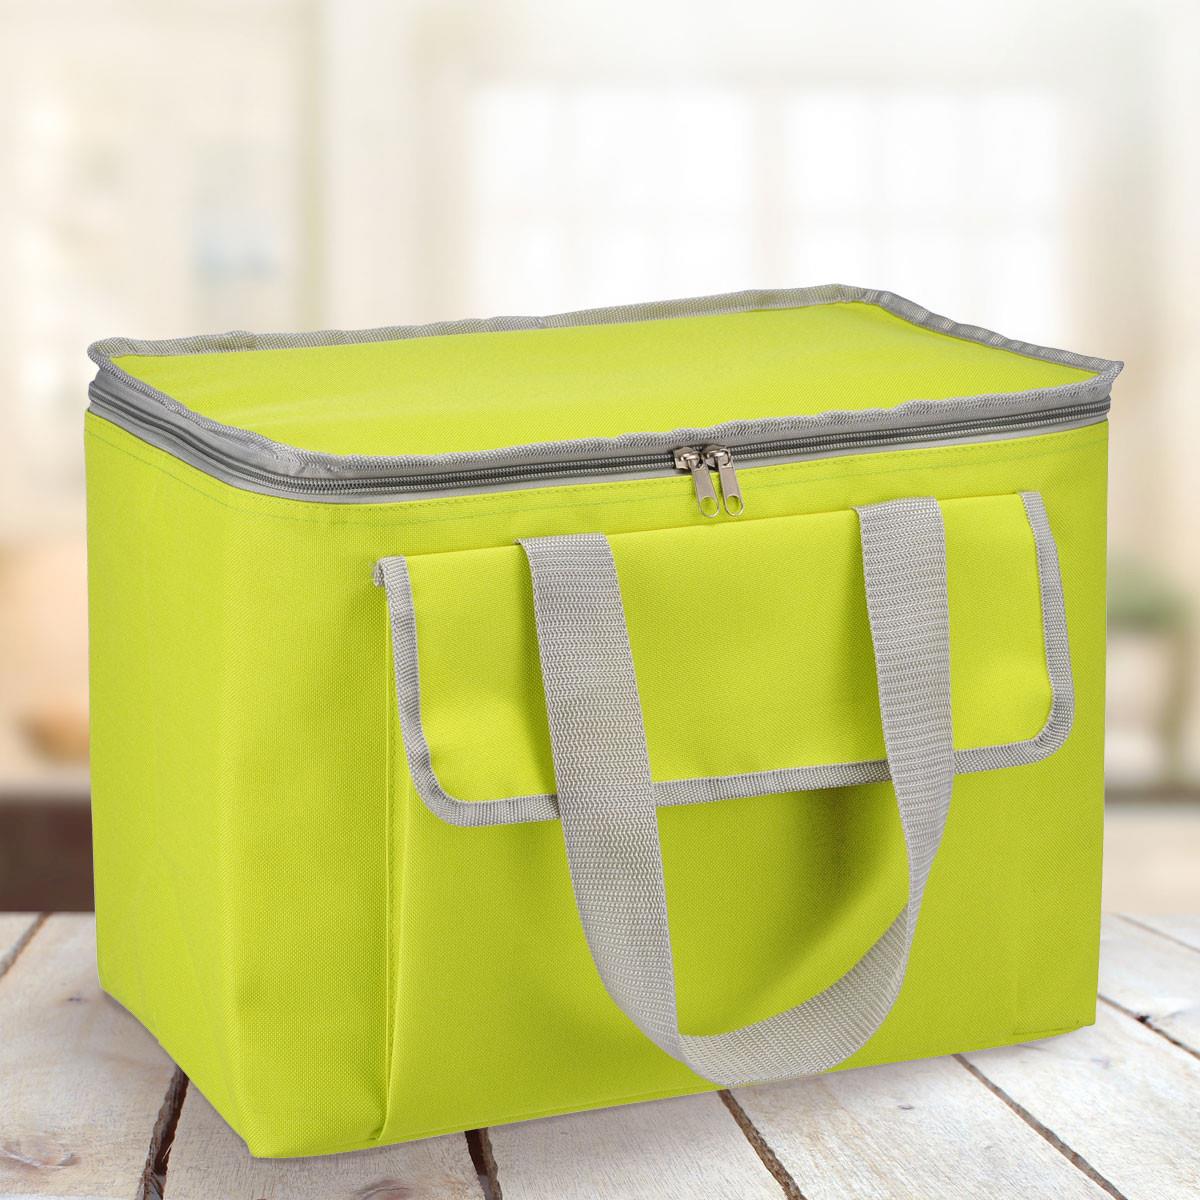 Large 30L Insulated Cool Bag GEEZY - The Magic Toy Shop